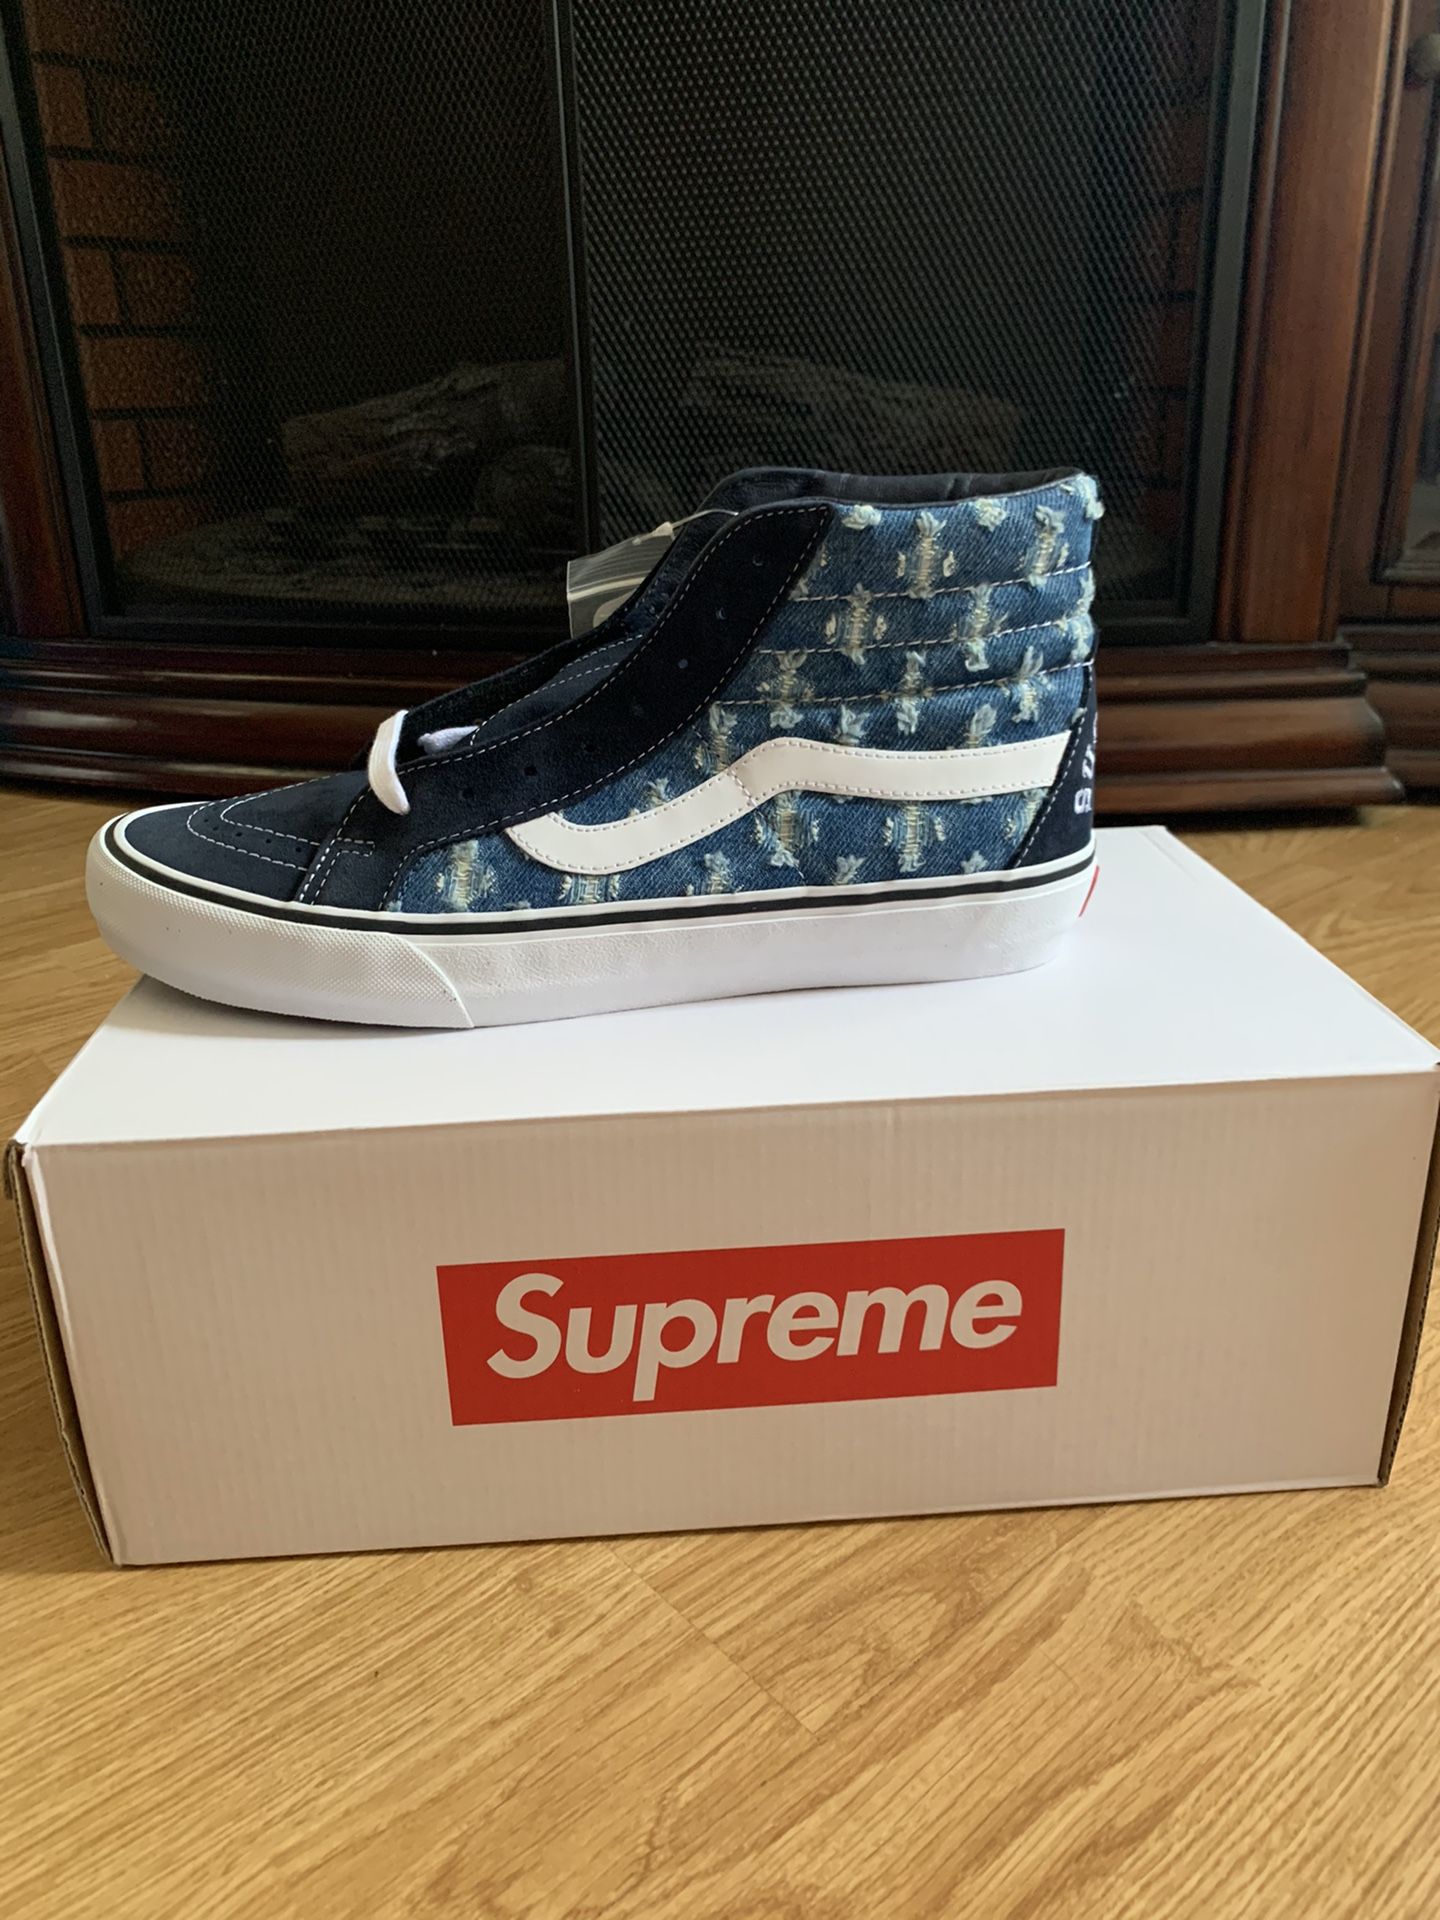 Supreme x Vans Hole punched size 11